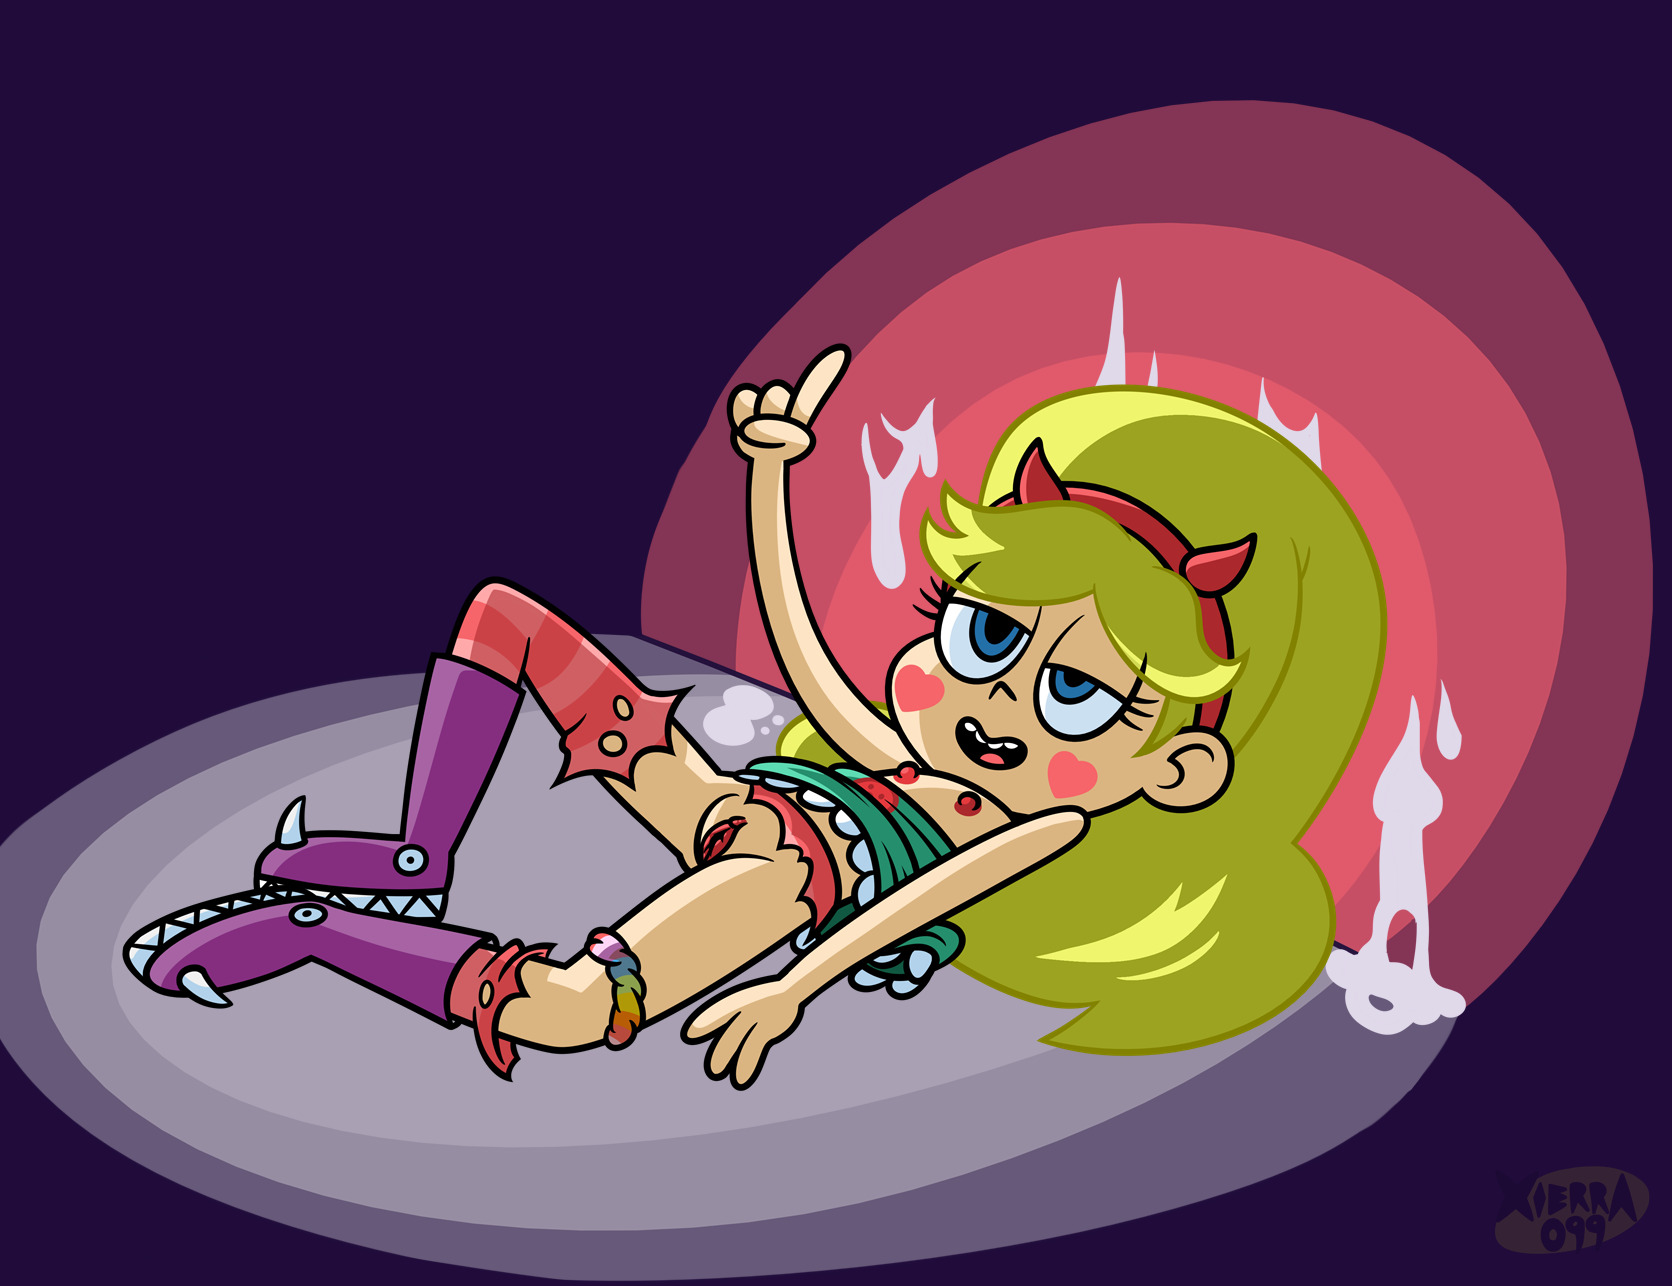 2153290-star_butterfly_star_vs_the_forces_of_evil_xierra099.